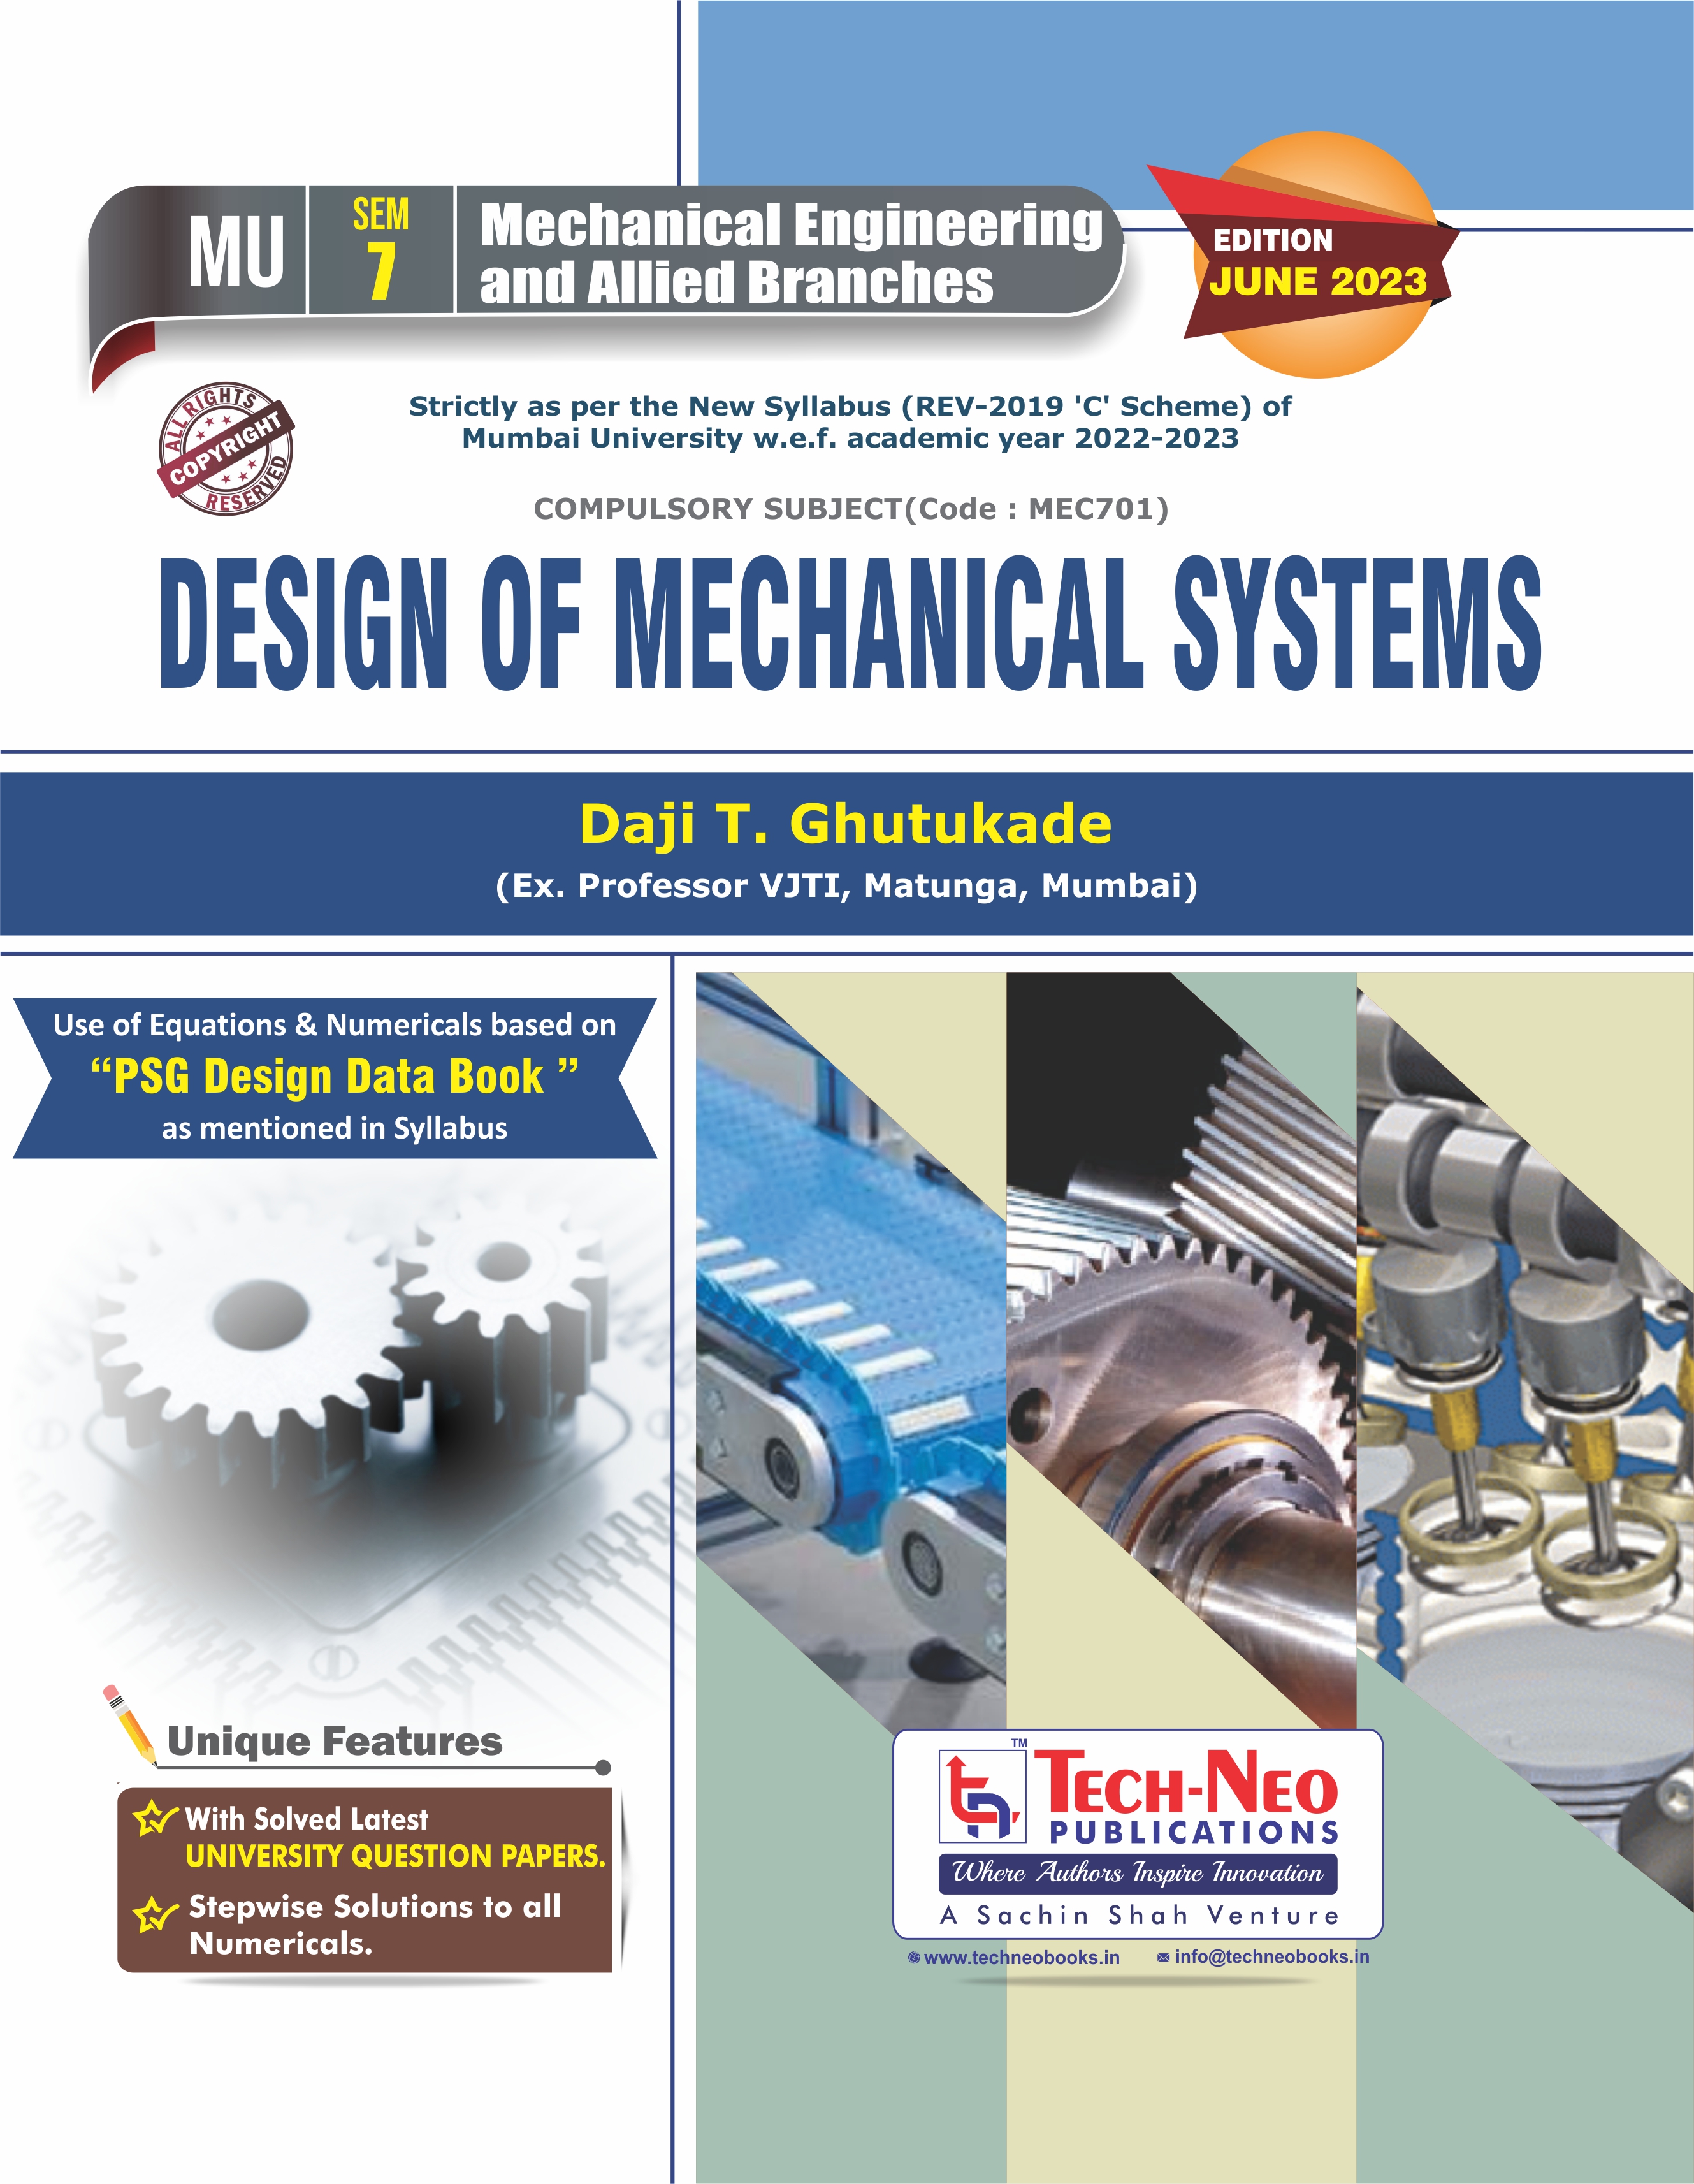 DESIGN OF MECHANICAL SYSTEMS